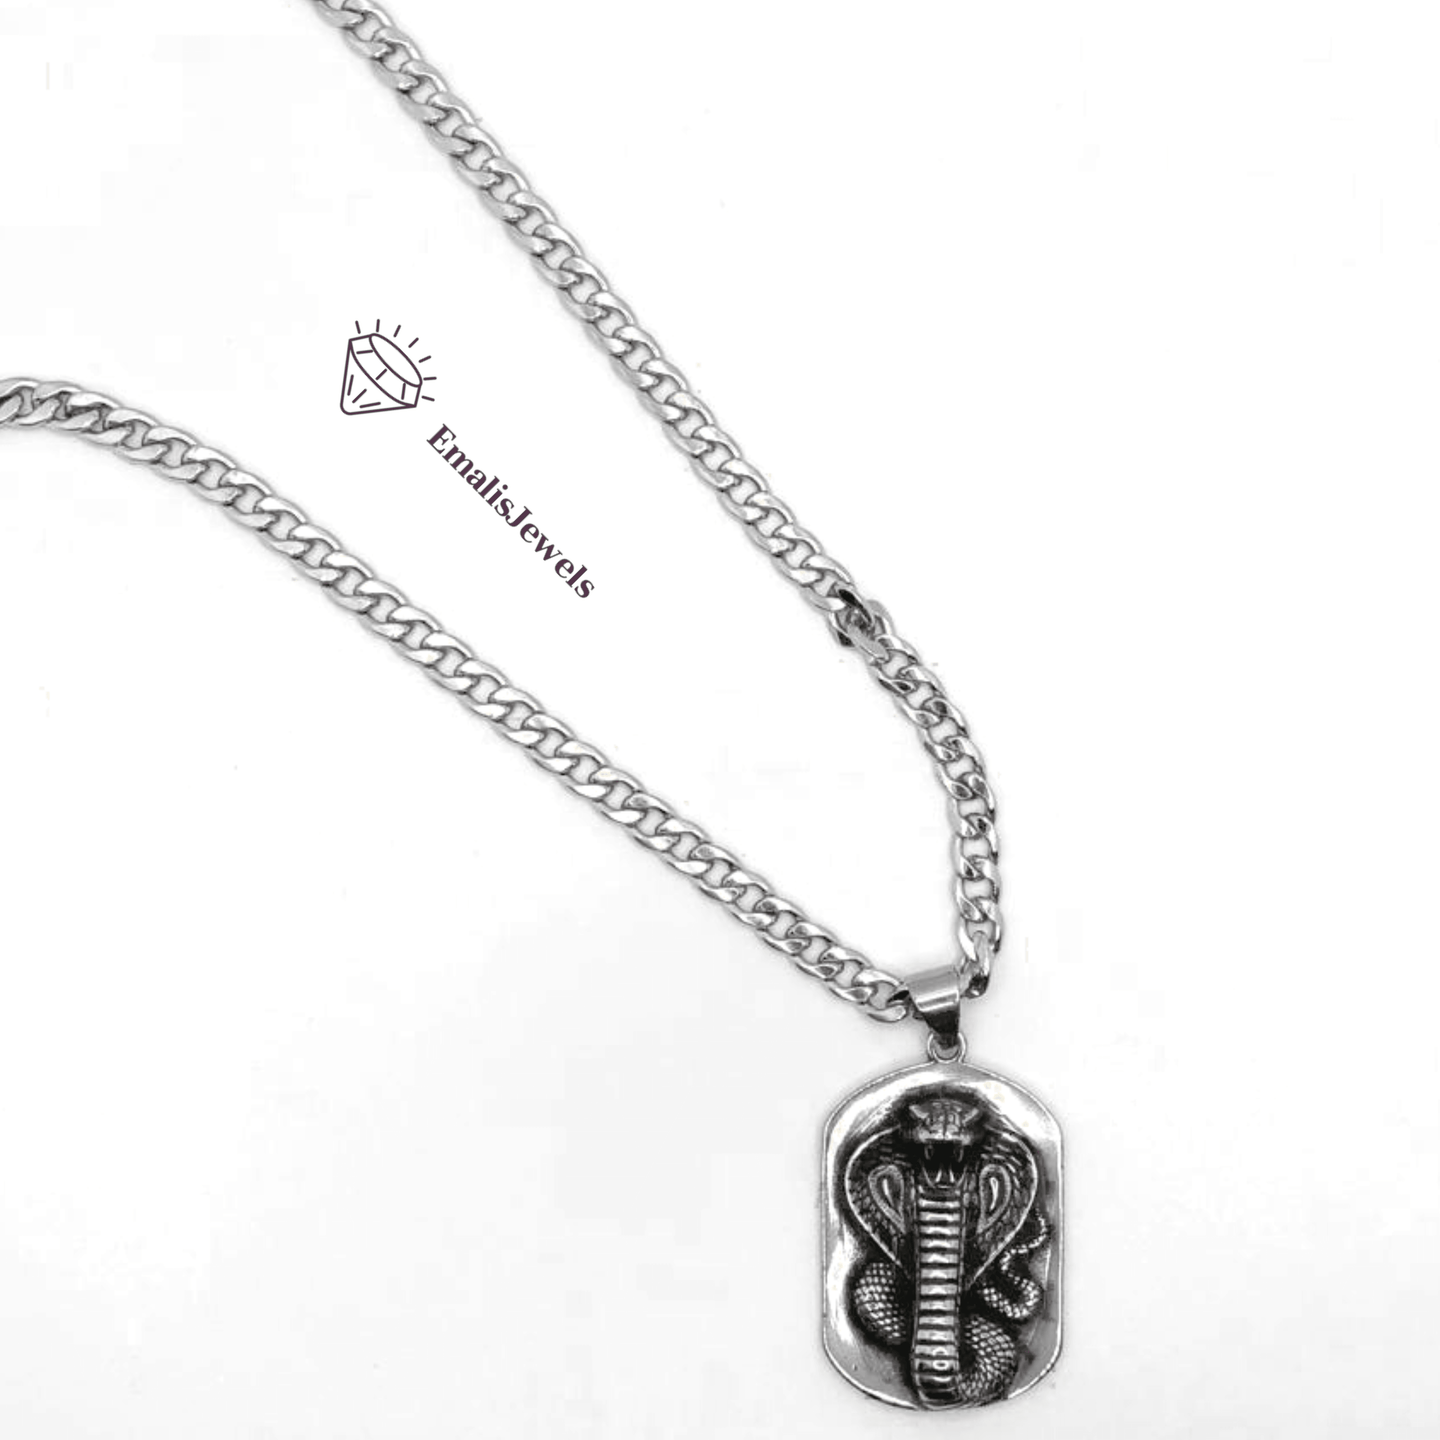 Stainless Steel Chain Necklace and Stainless Steel Pendant Sets by Emalis - PremiumBrandGoods